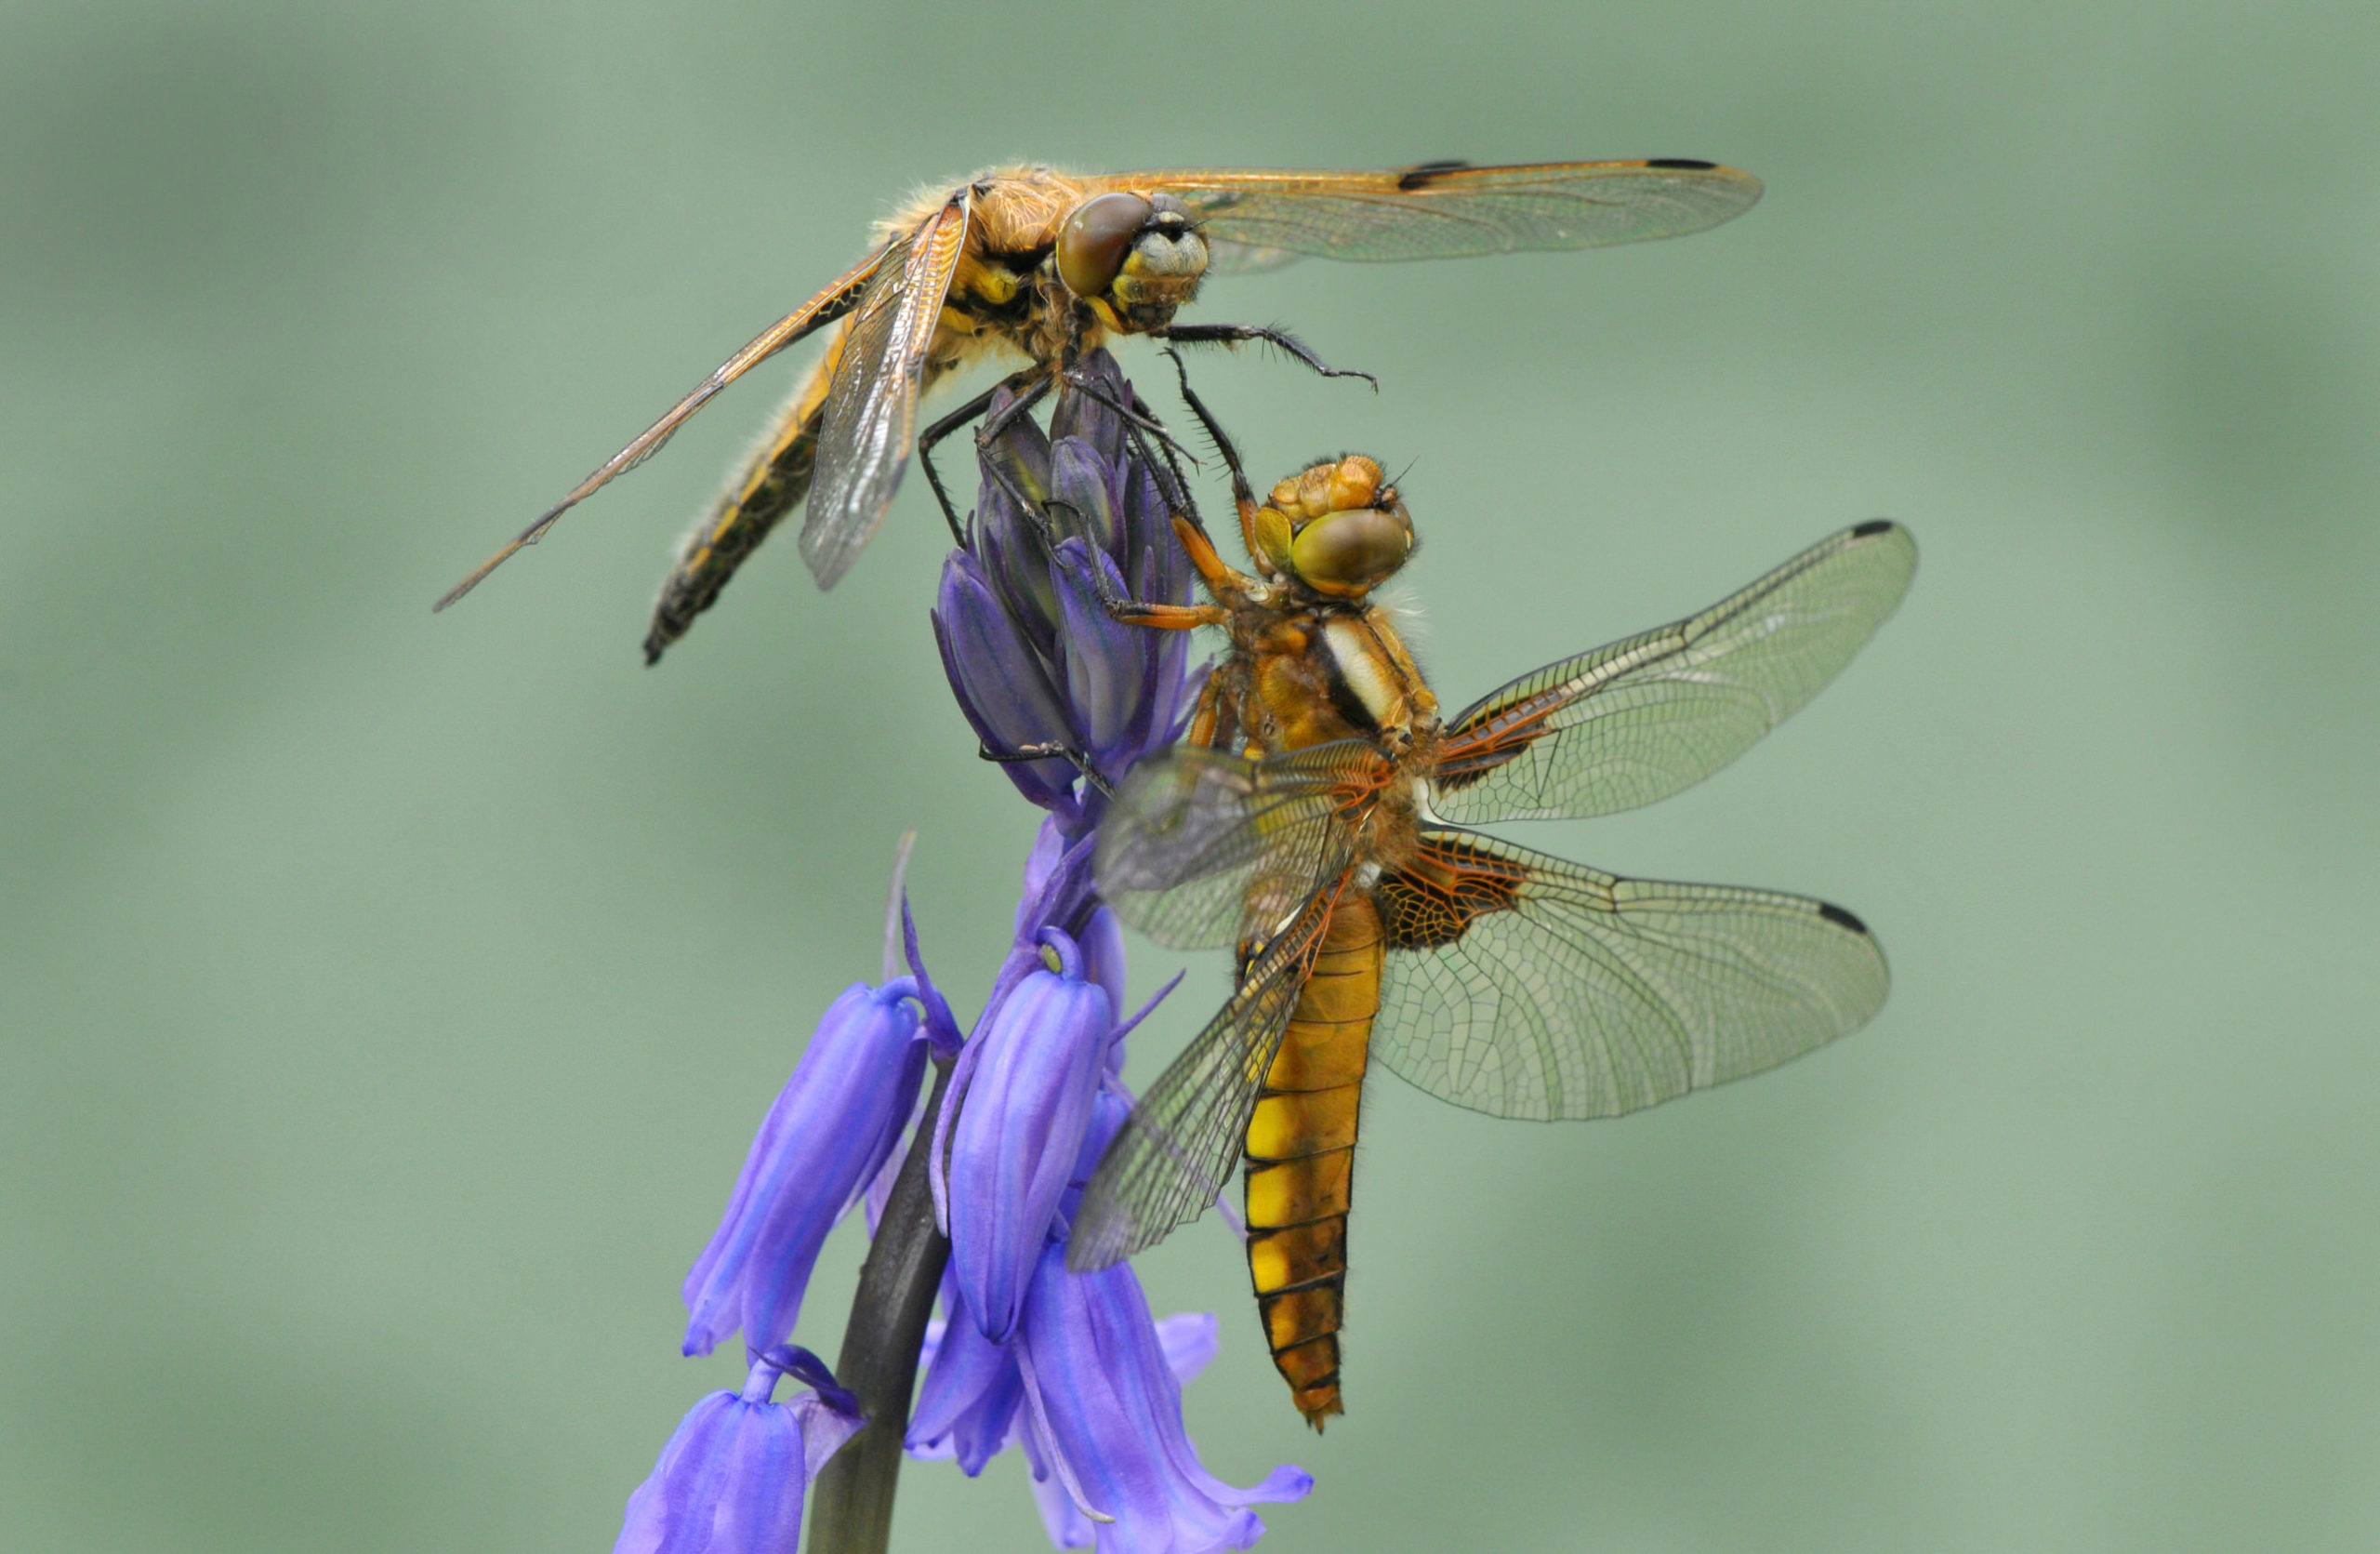 Four-spotted chaser and a broad-bodied chaser on a bluebell. Commended in the 2014 NIW Photography Competition Insects Alive category.